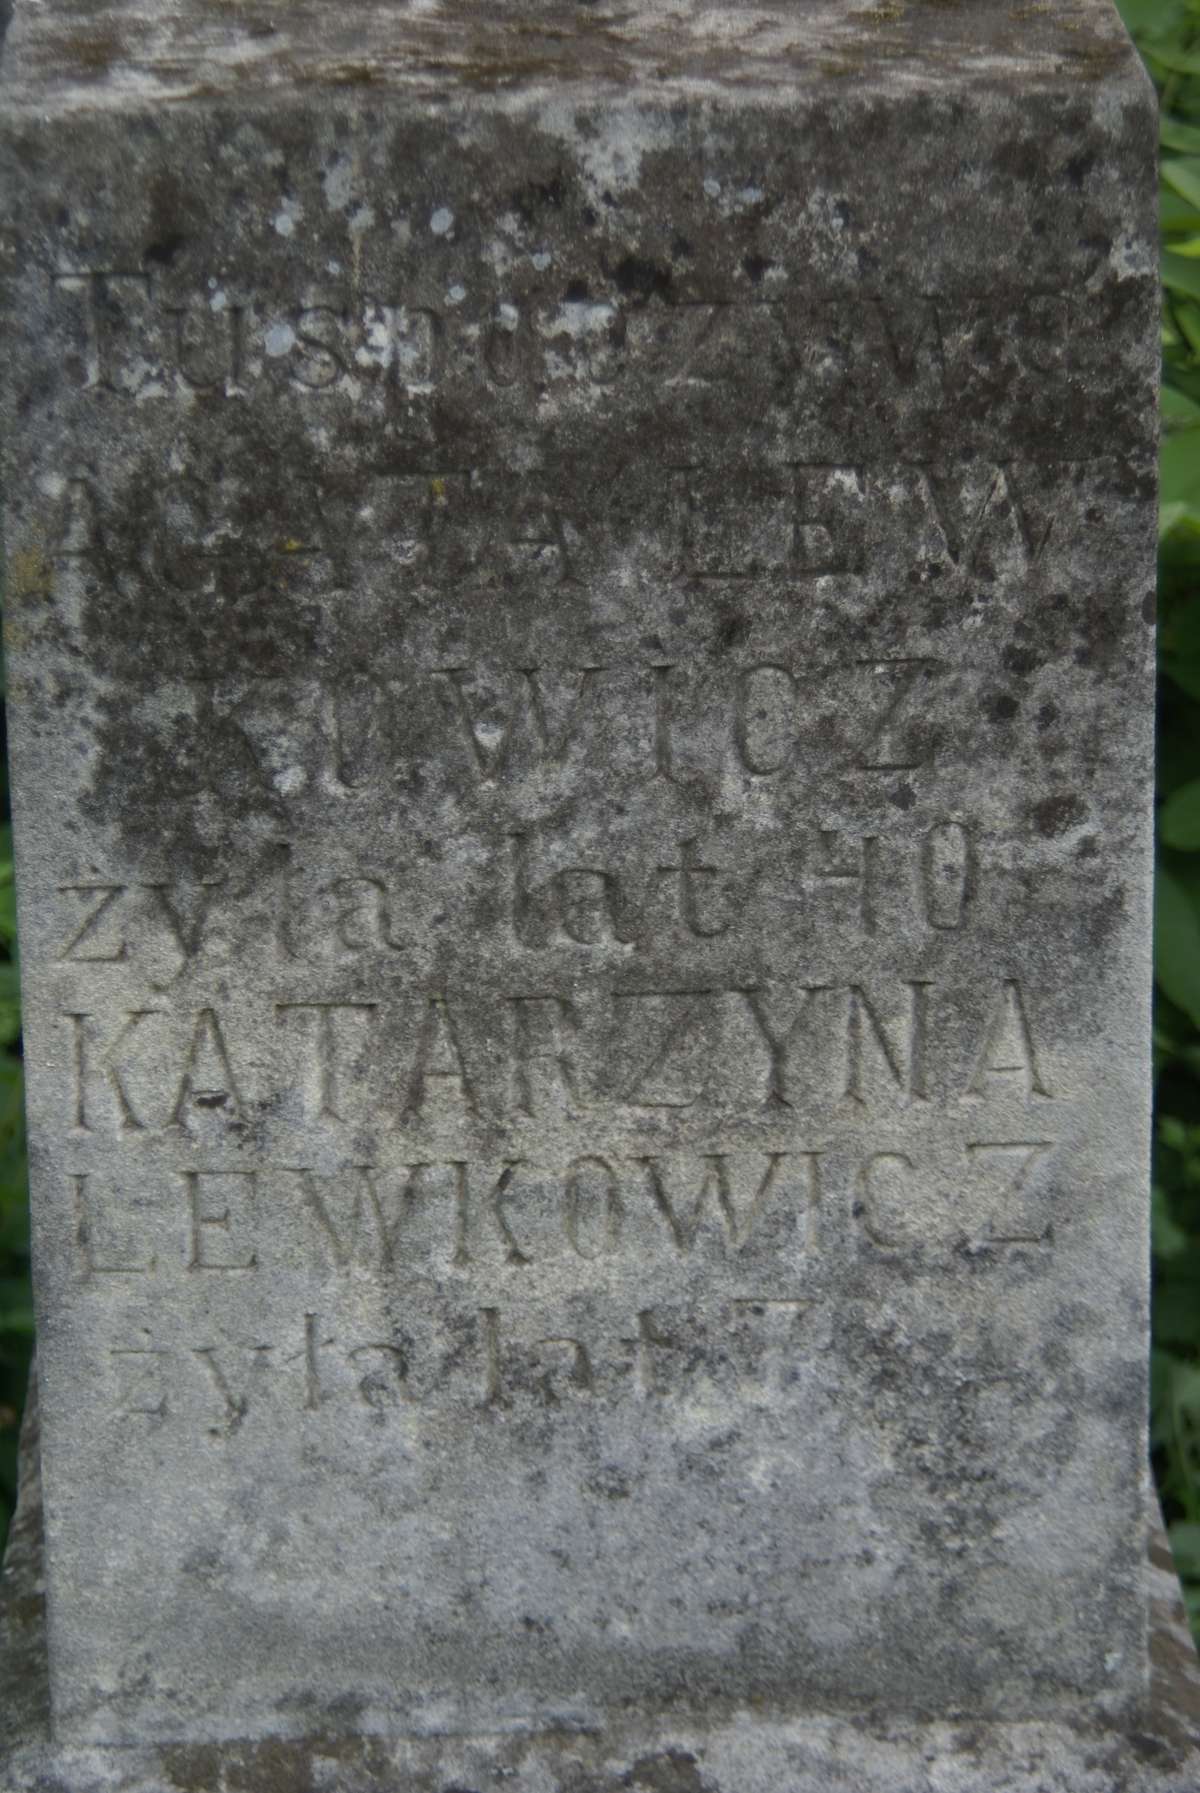 Fragment of the tombstone of Agata and Katarzyna Lewkowicz, Zbarazh cemetery, as of 2018